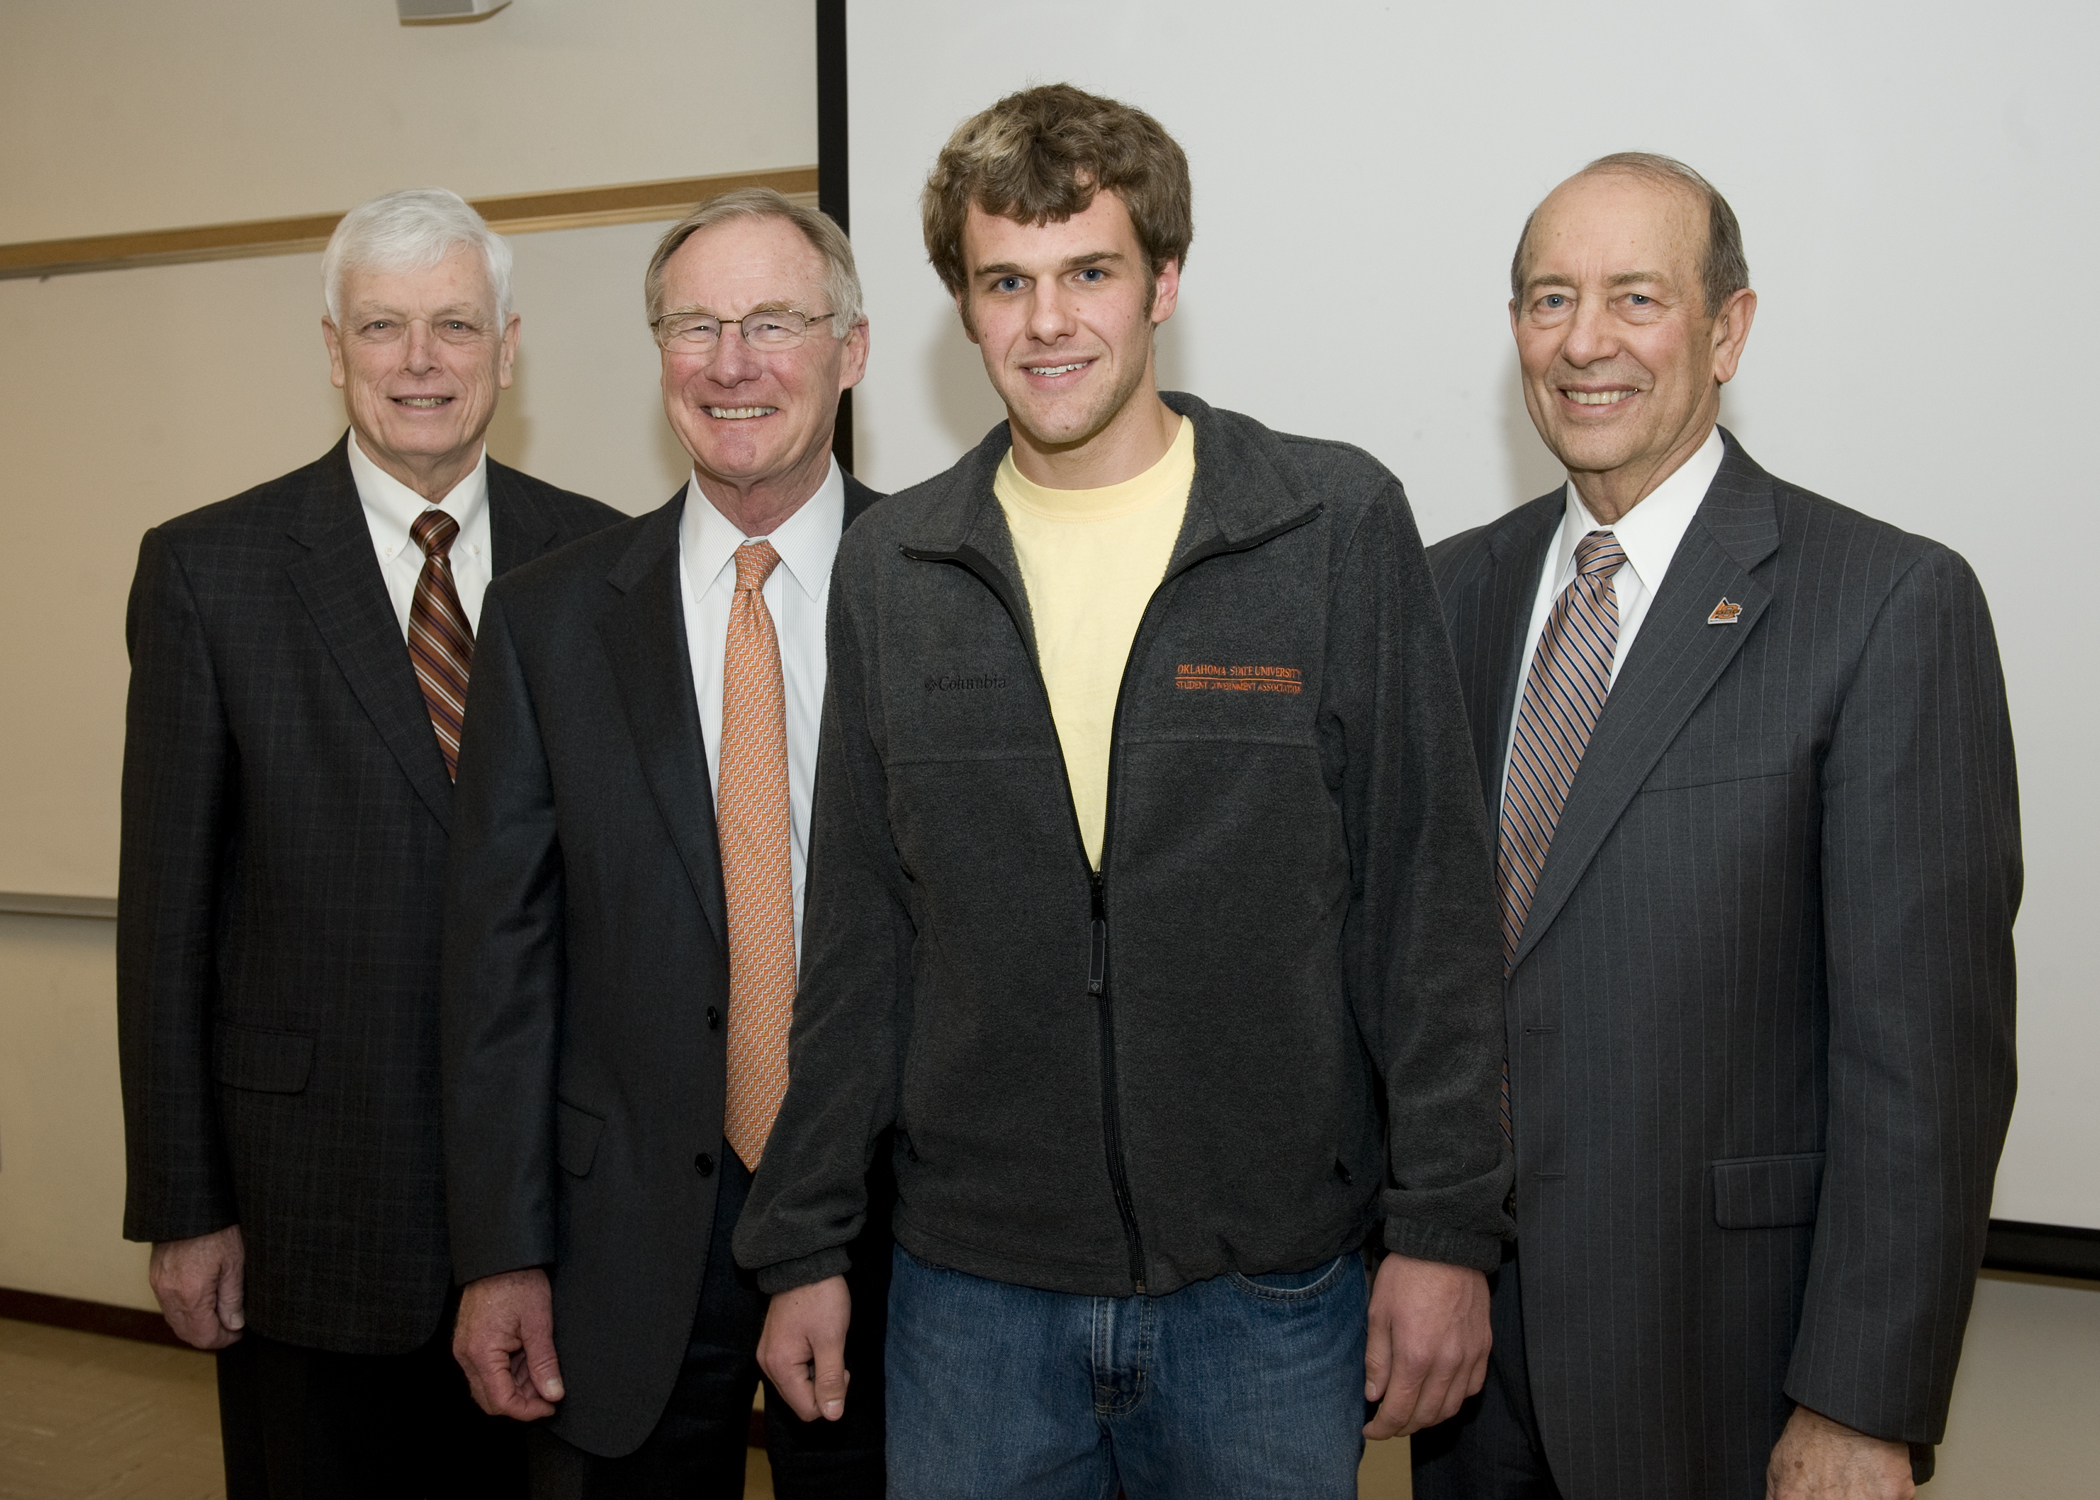 Oklahoma State University junior Flint Holbrook is congratulated by OSU Dean of Engineering Karl Reid (far left),OSU President Burns Hargis and OSU Dean of Agriculture Robert Whitson (far right) on being chosen one of the nation’s 80 students to win the Morris K. Udall Foundation Scholarship. Holbrook, who is a biosystems engineering major from Clover, South Carolina, was one of two OSU students to receive the honor. OSU junior Blake Jackson an agribusiness major from Hartshorne, Okla. was also named a Udall Scholar.